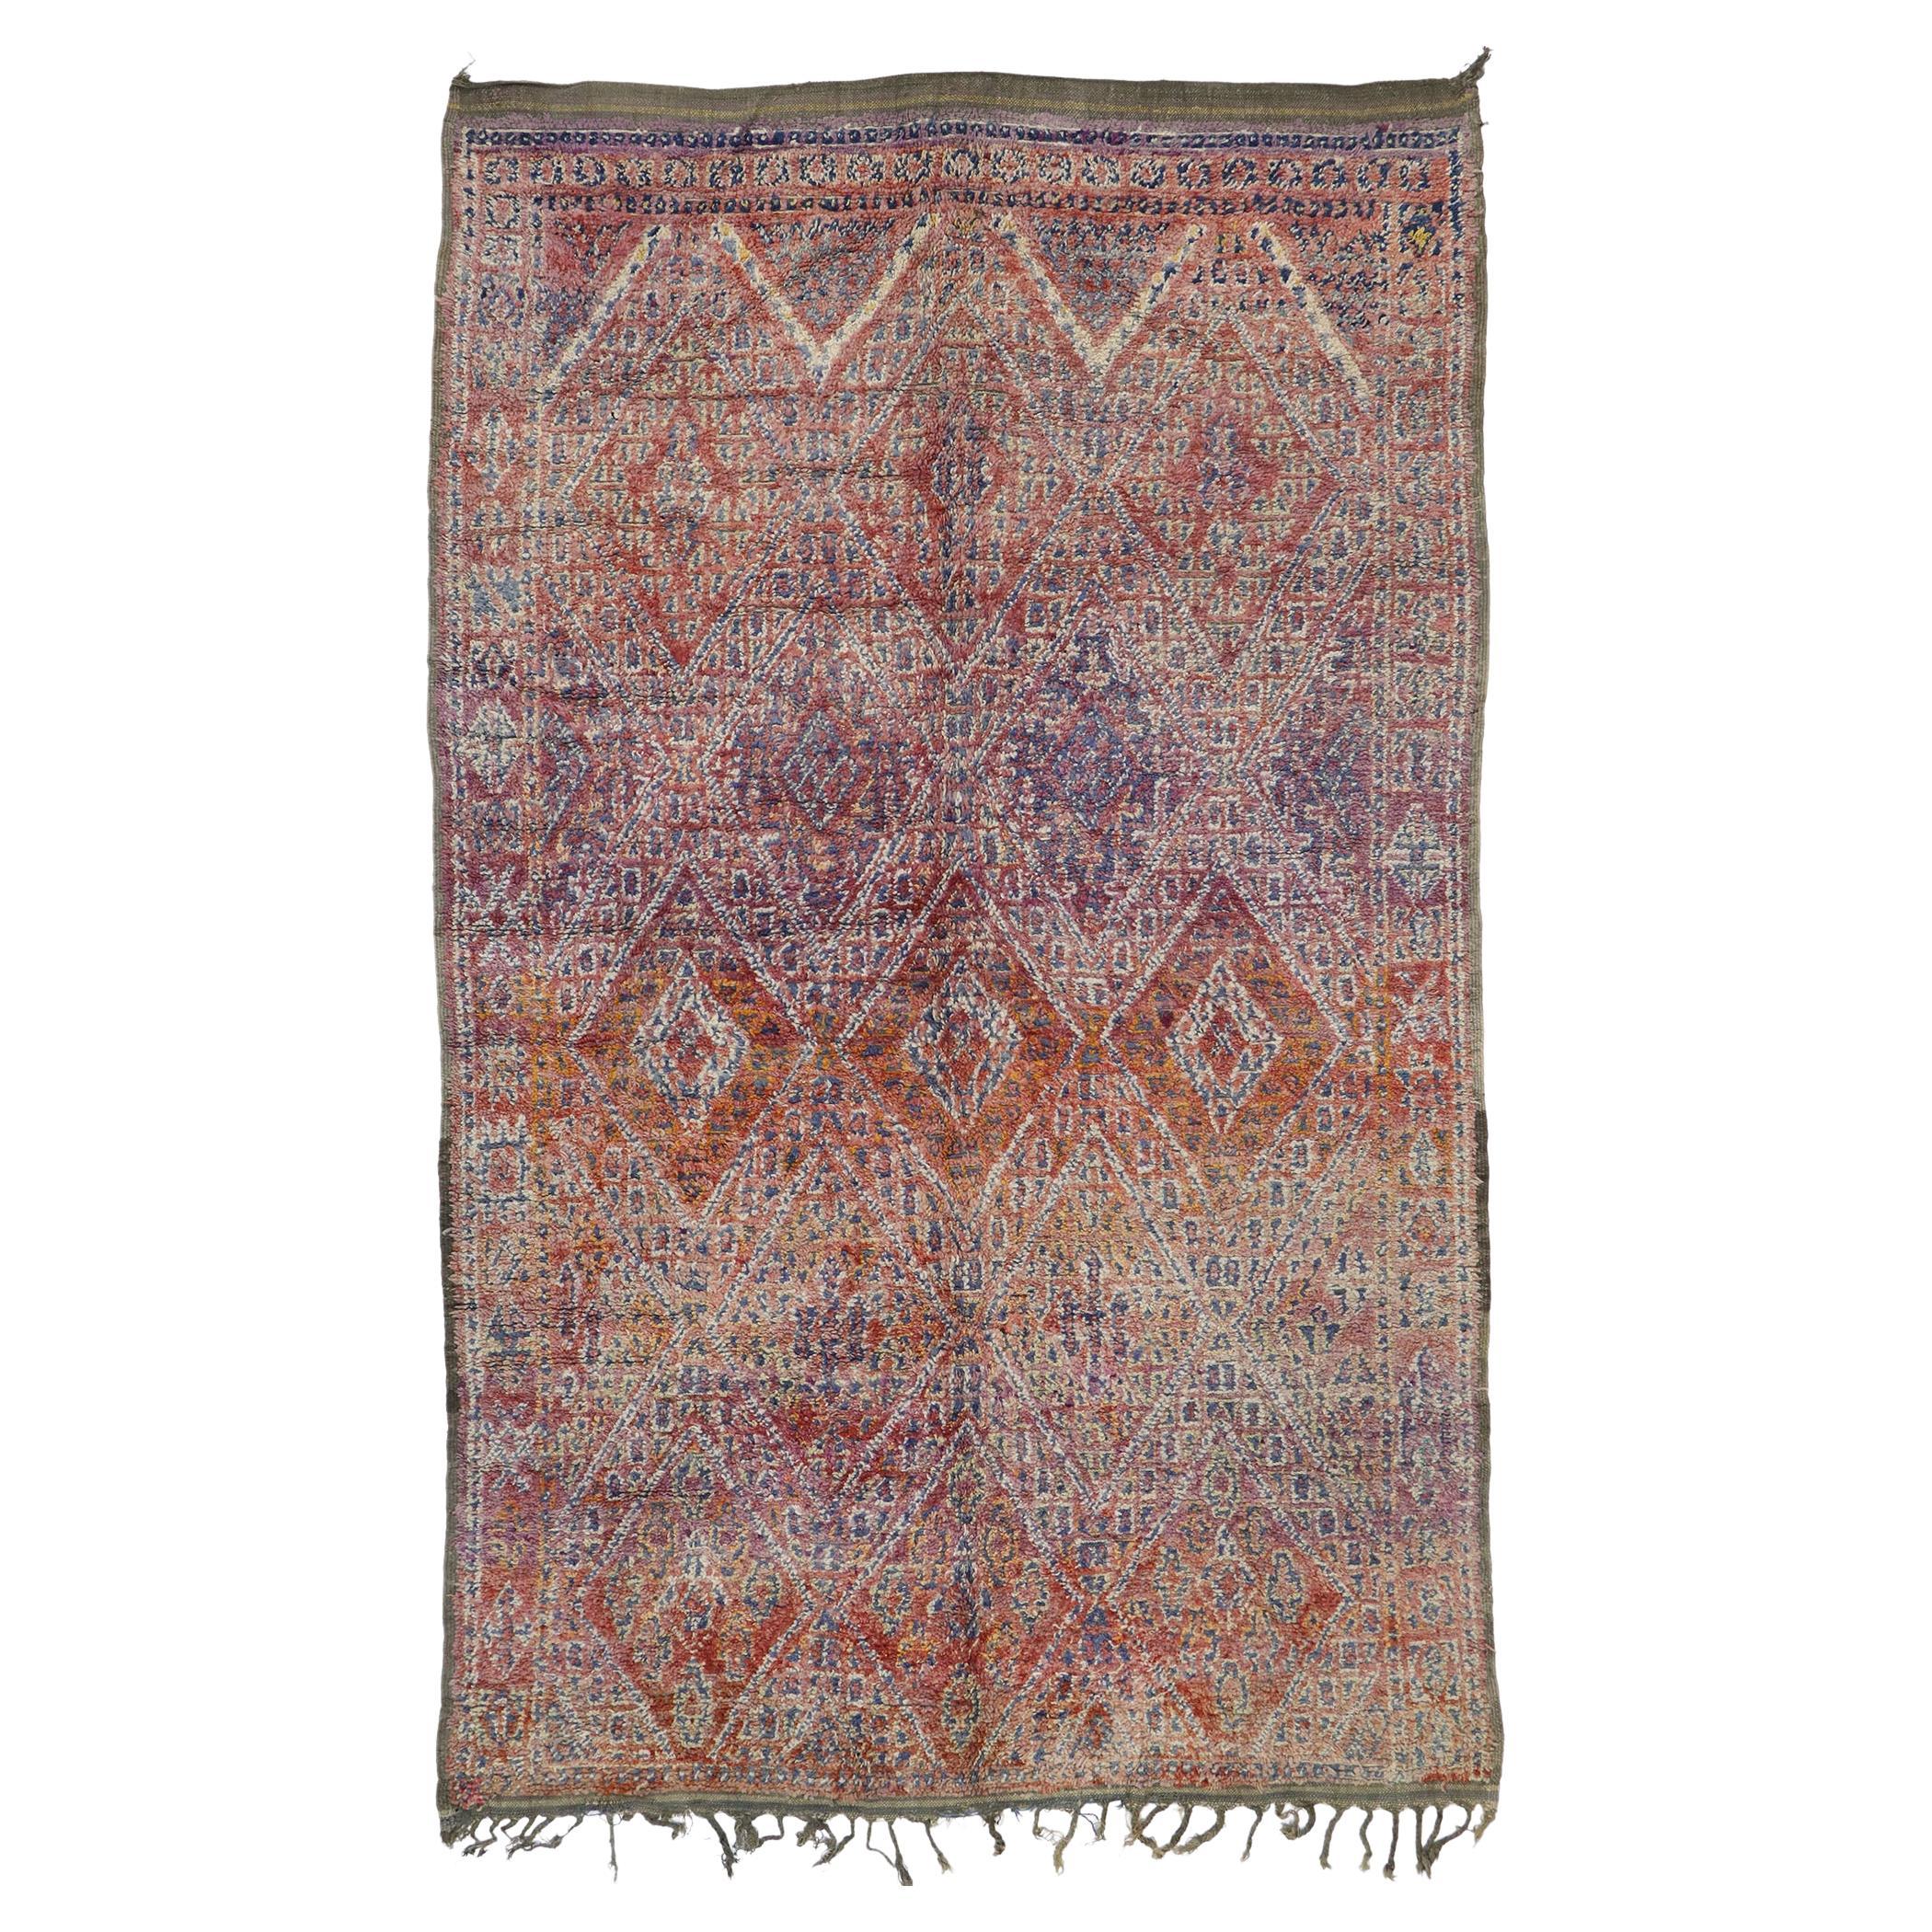 Vintage Beni MGuild Moroccan Rug, Cozy Nomad Meets Sultry Bohemian For Sale